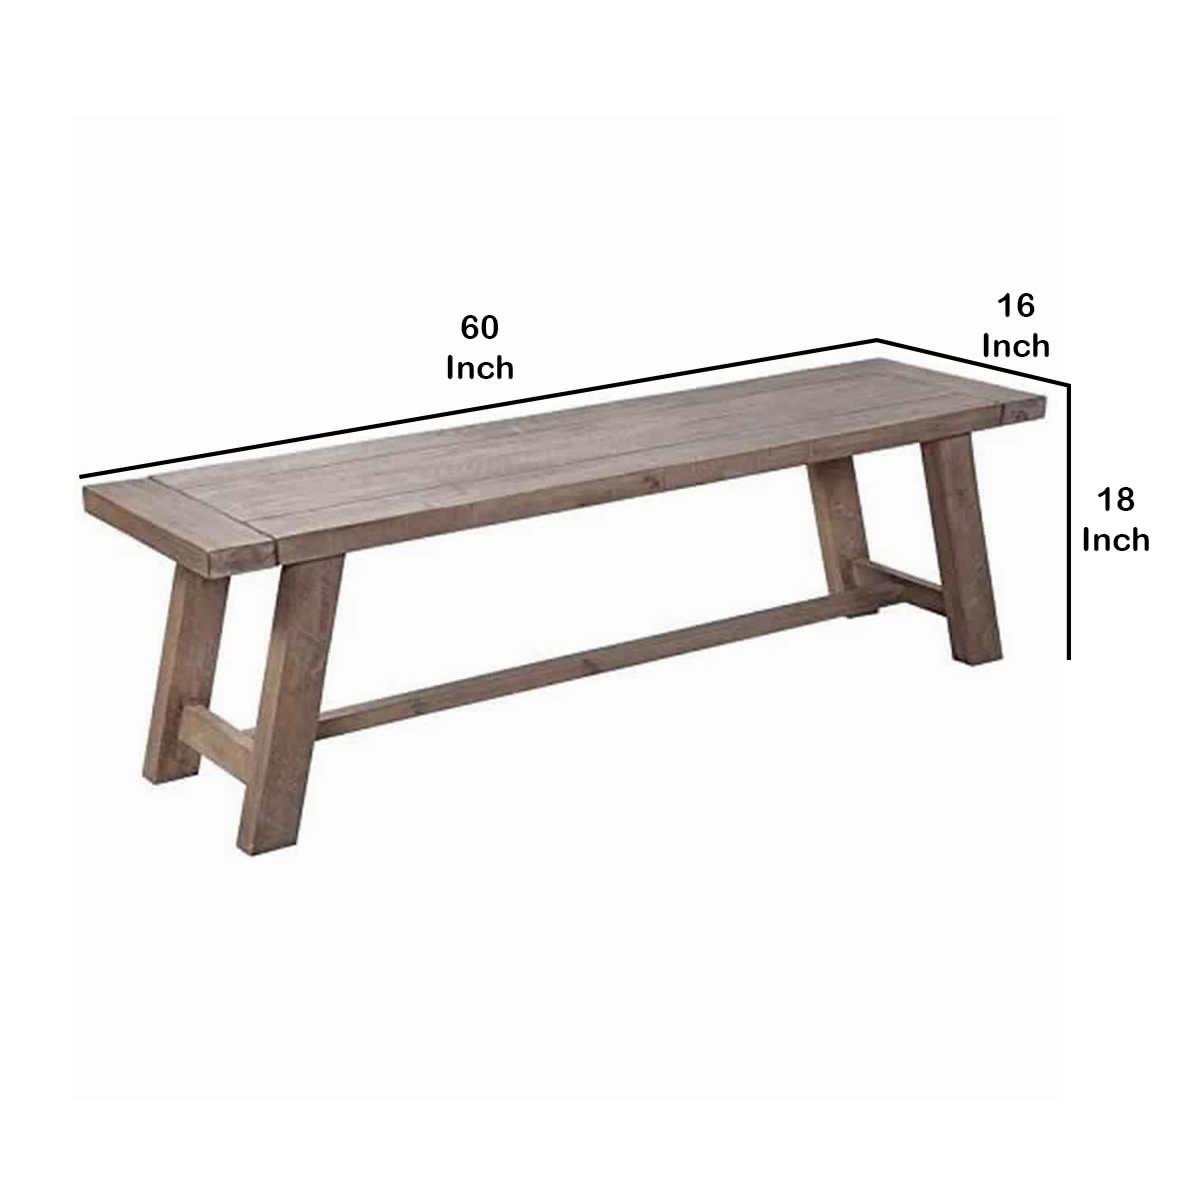 Farmhouse Wooden Dining Bench with Grain Details and Plank Top, Brown - BM220511